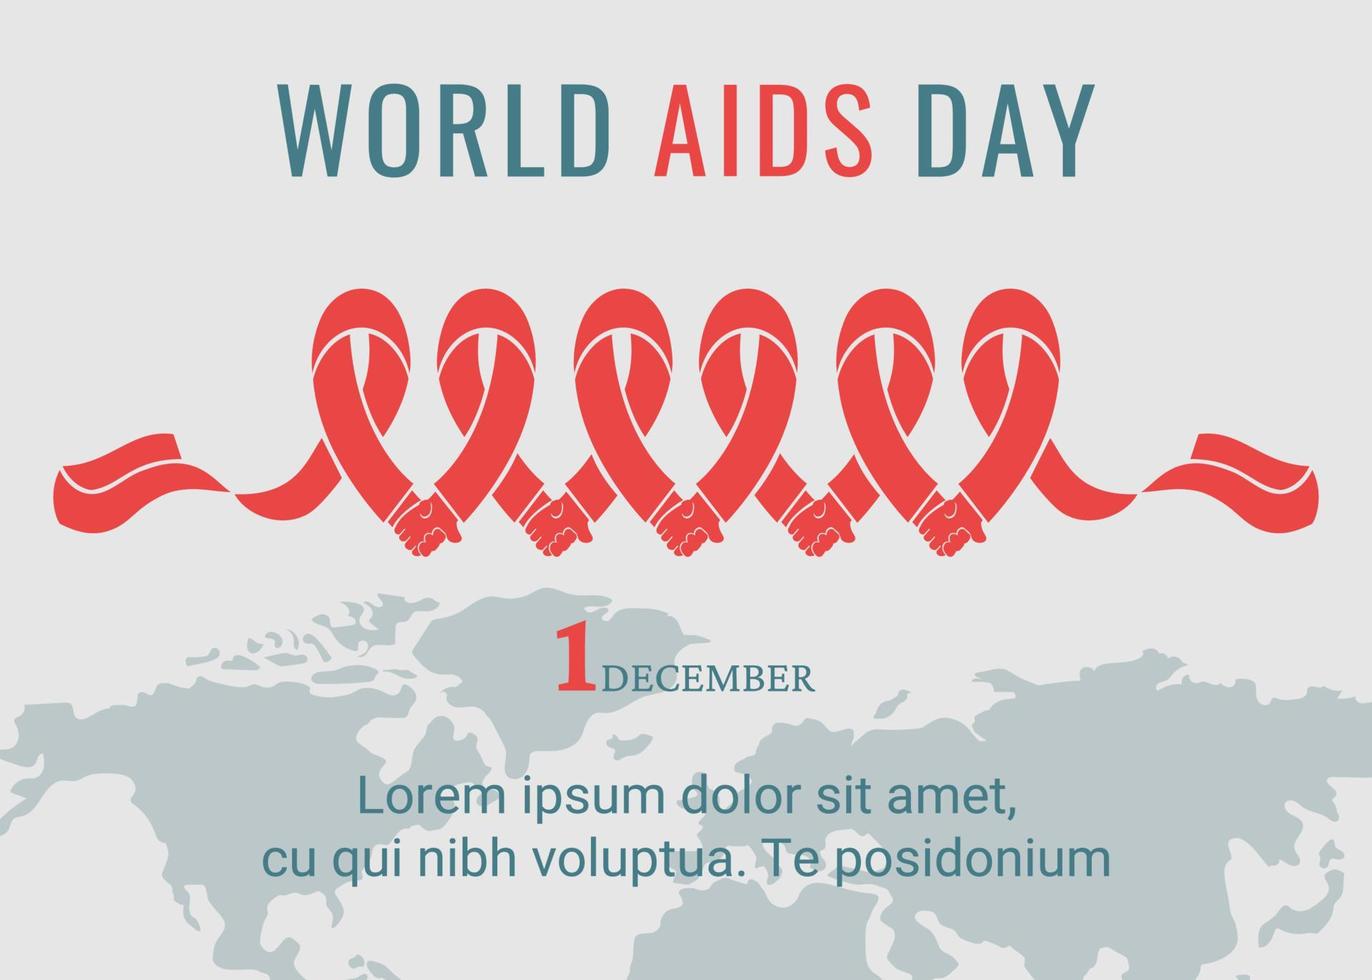 World AIDS day banner. Red ribbon as symbol of the AIDS control. Support for hiv infected people. World map with lettering. Vector illustration